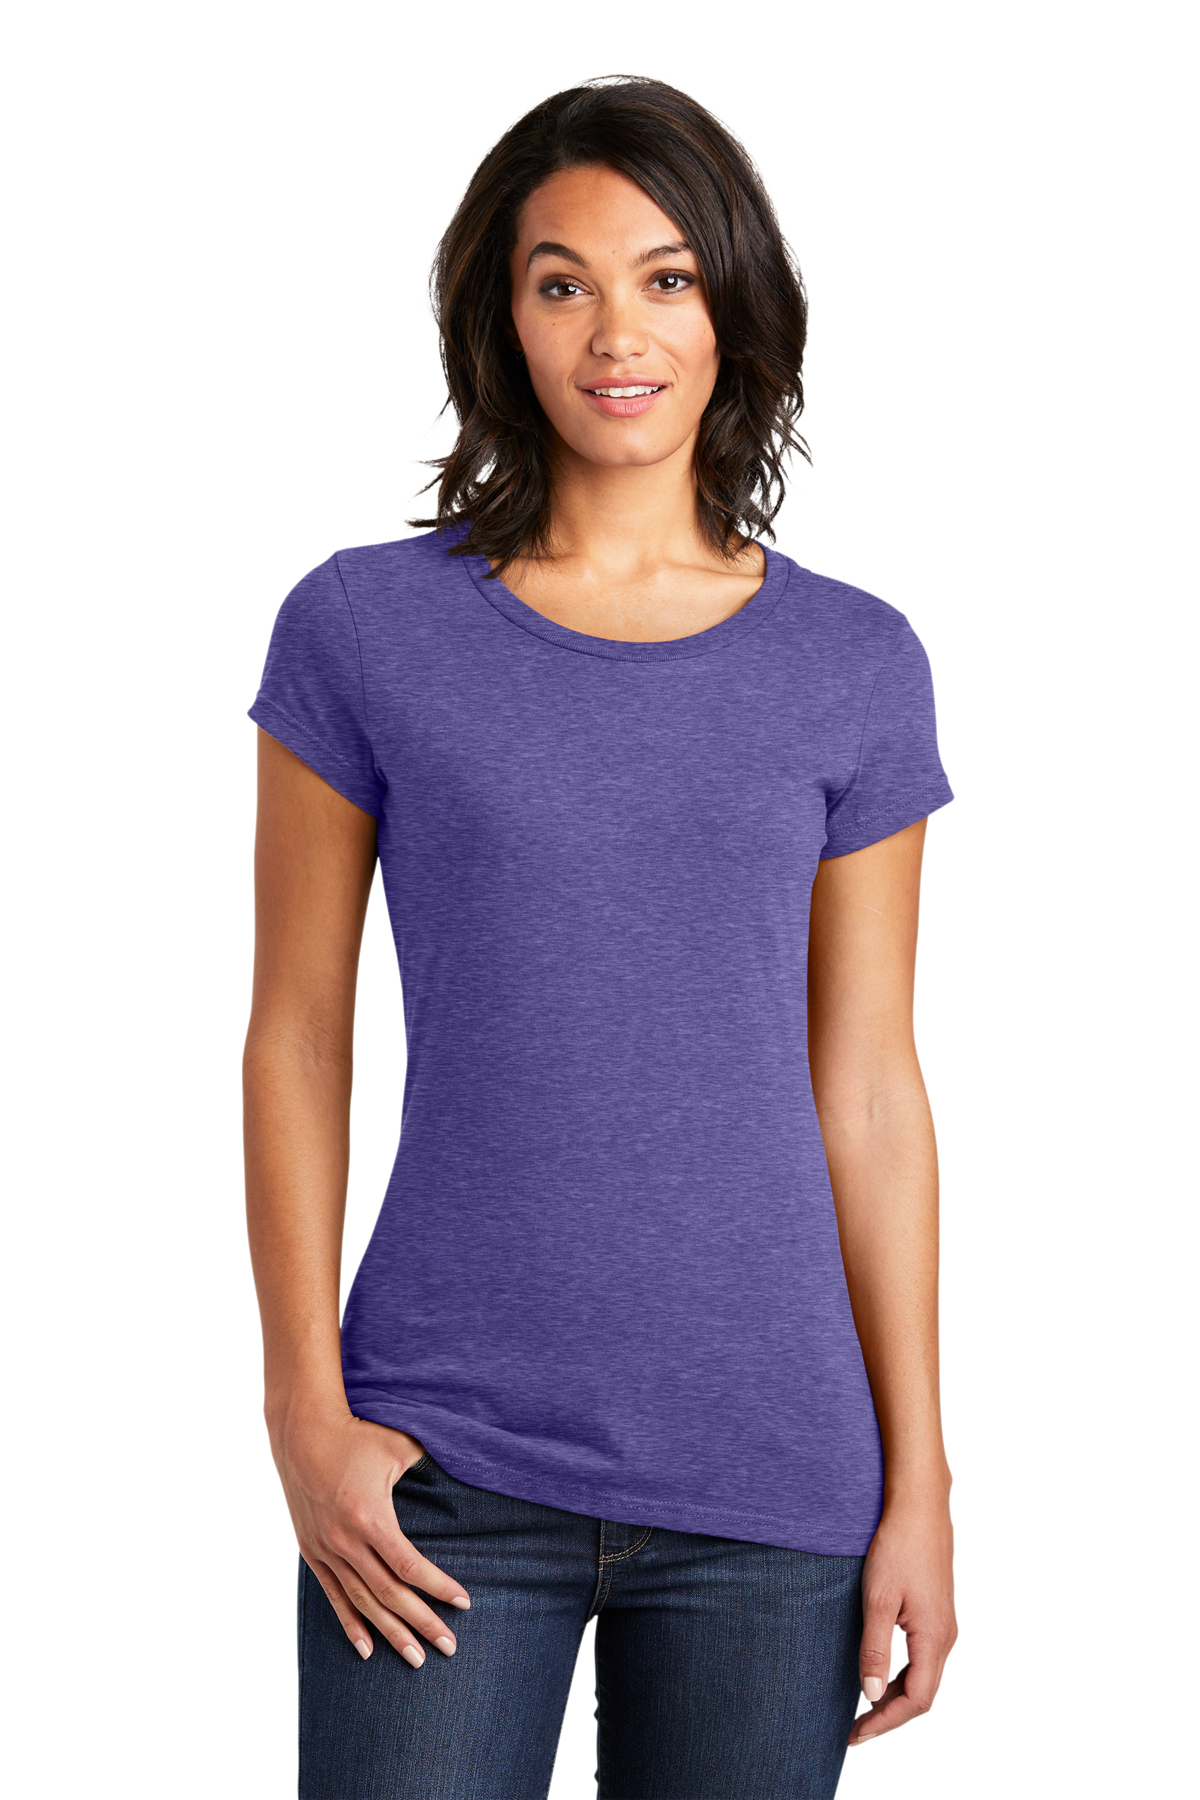 District Women’s Fitted Very Important Tee | Product | District